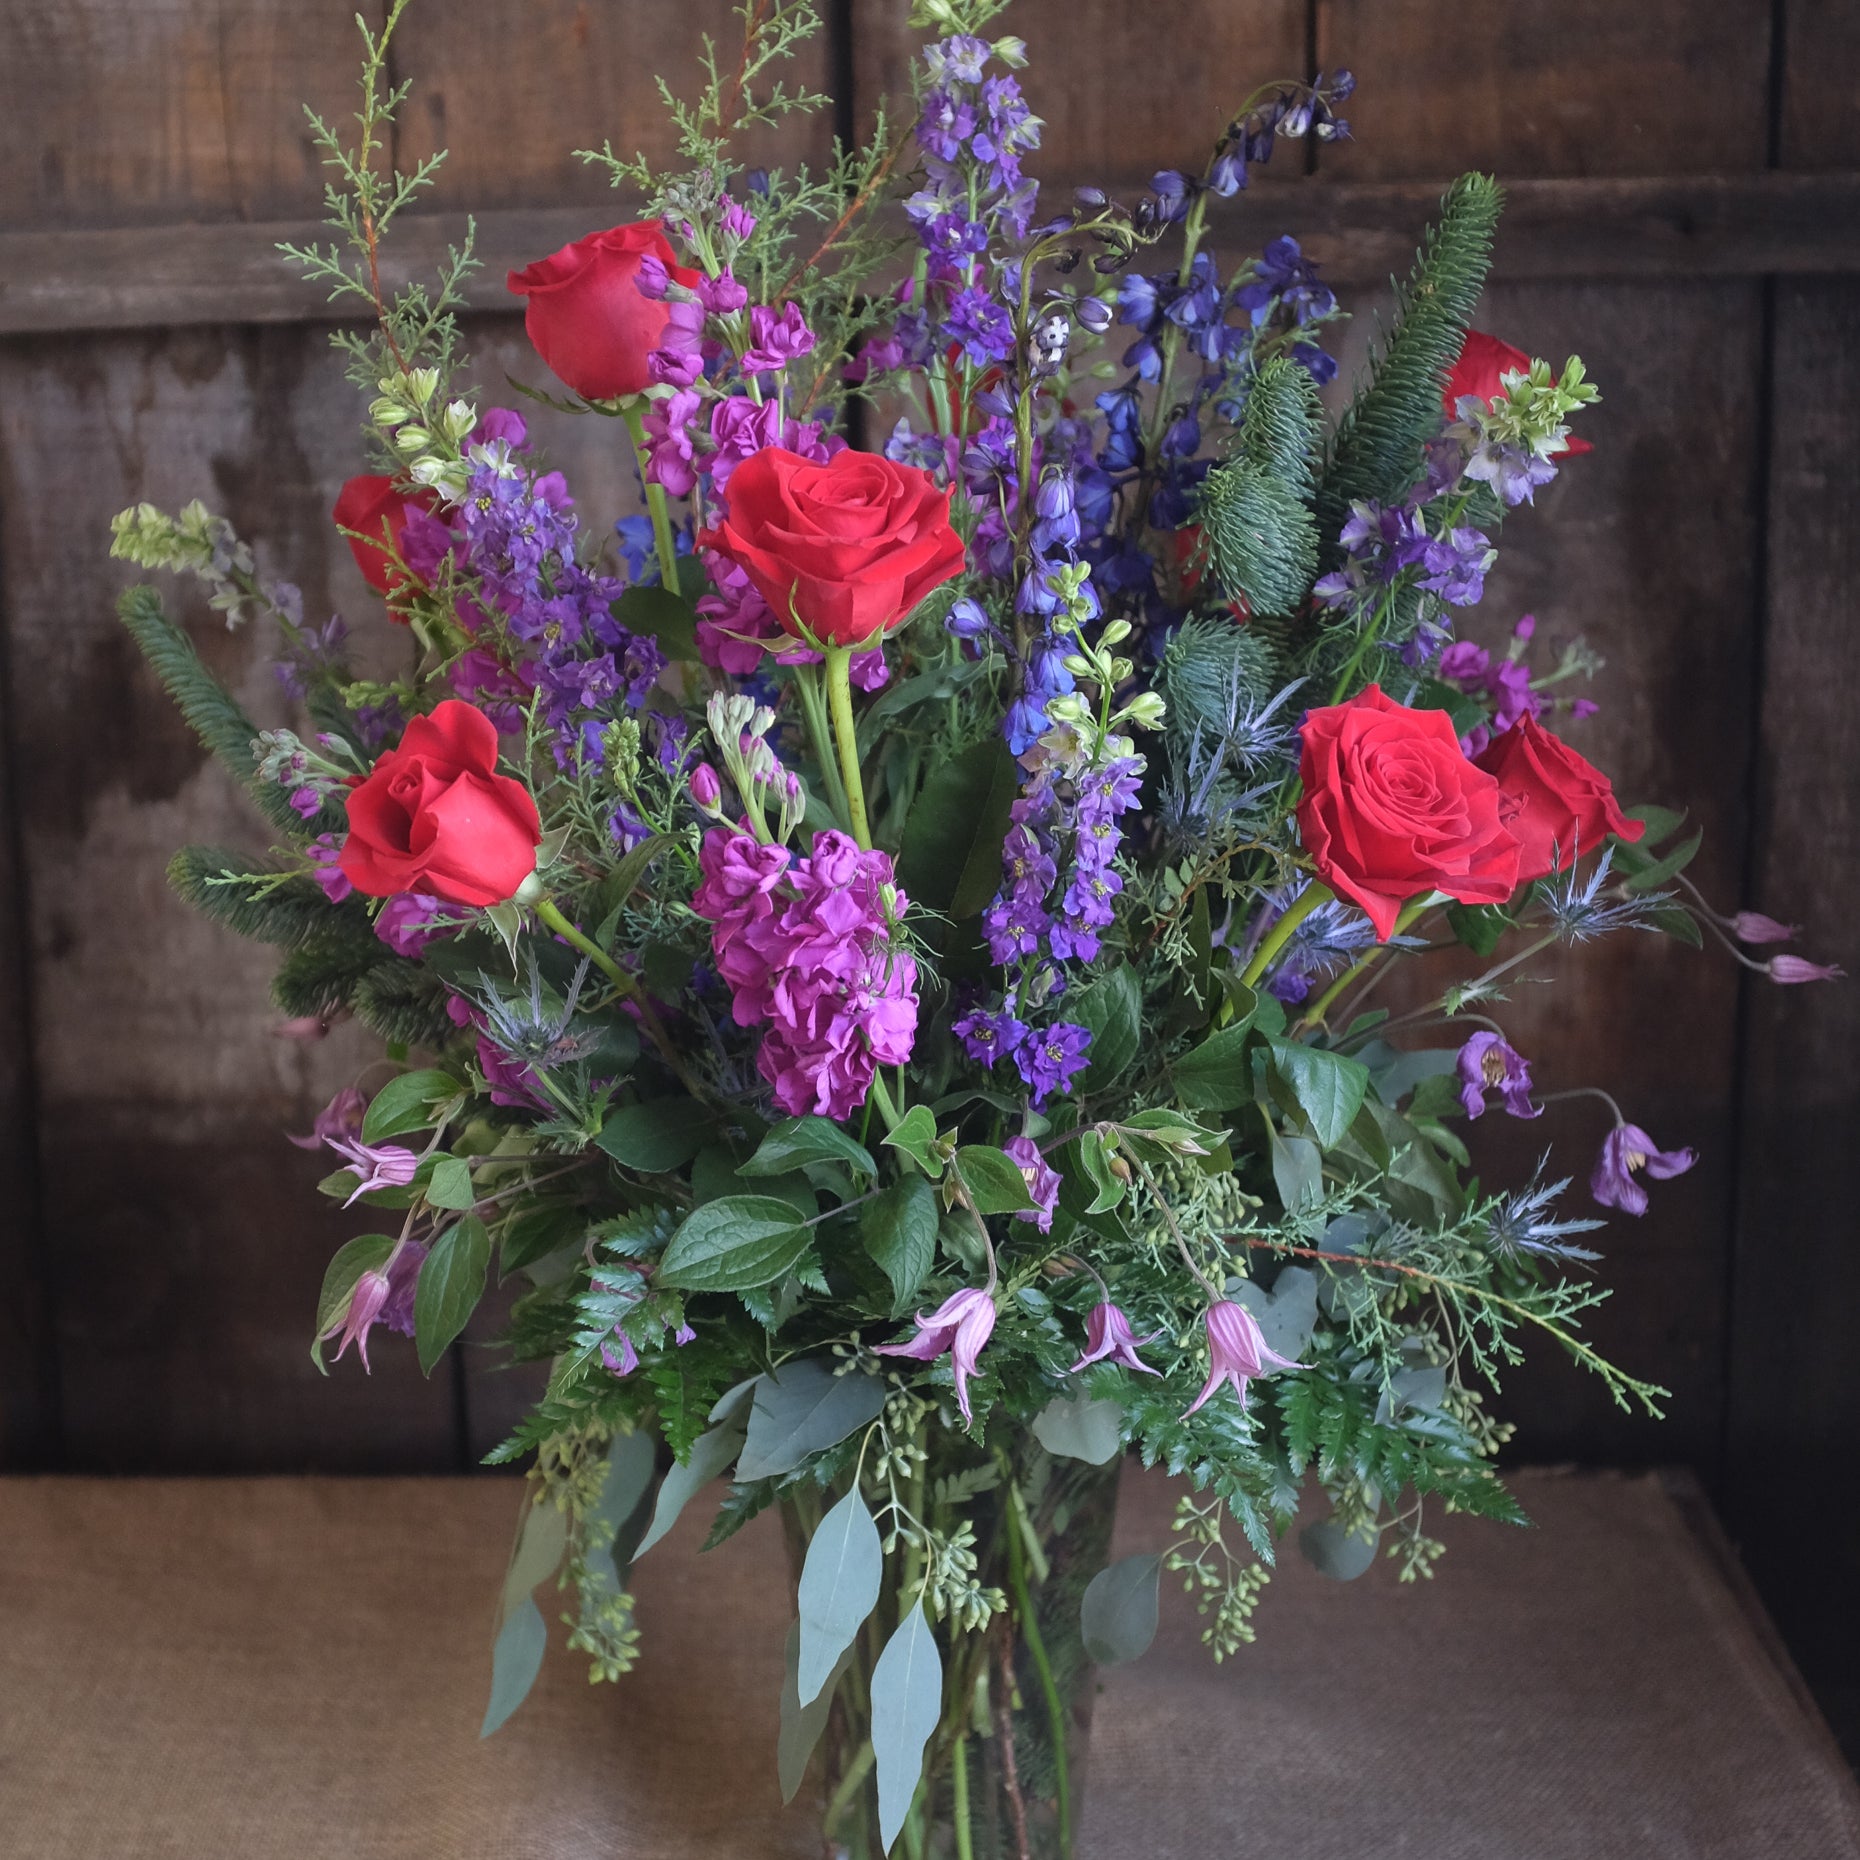 a tall and elegant floral design with roses, delphinium, and seeded eucalyptus by Michler's